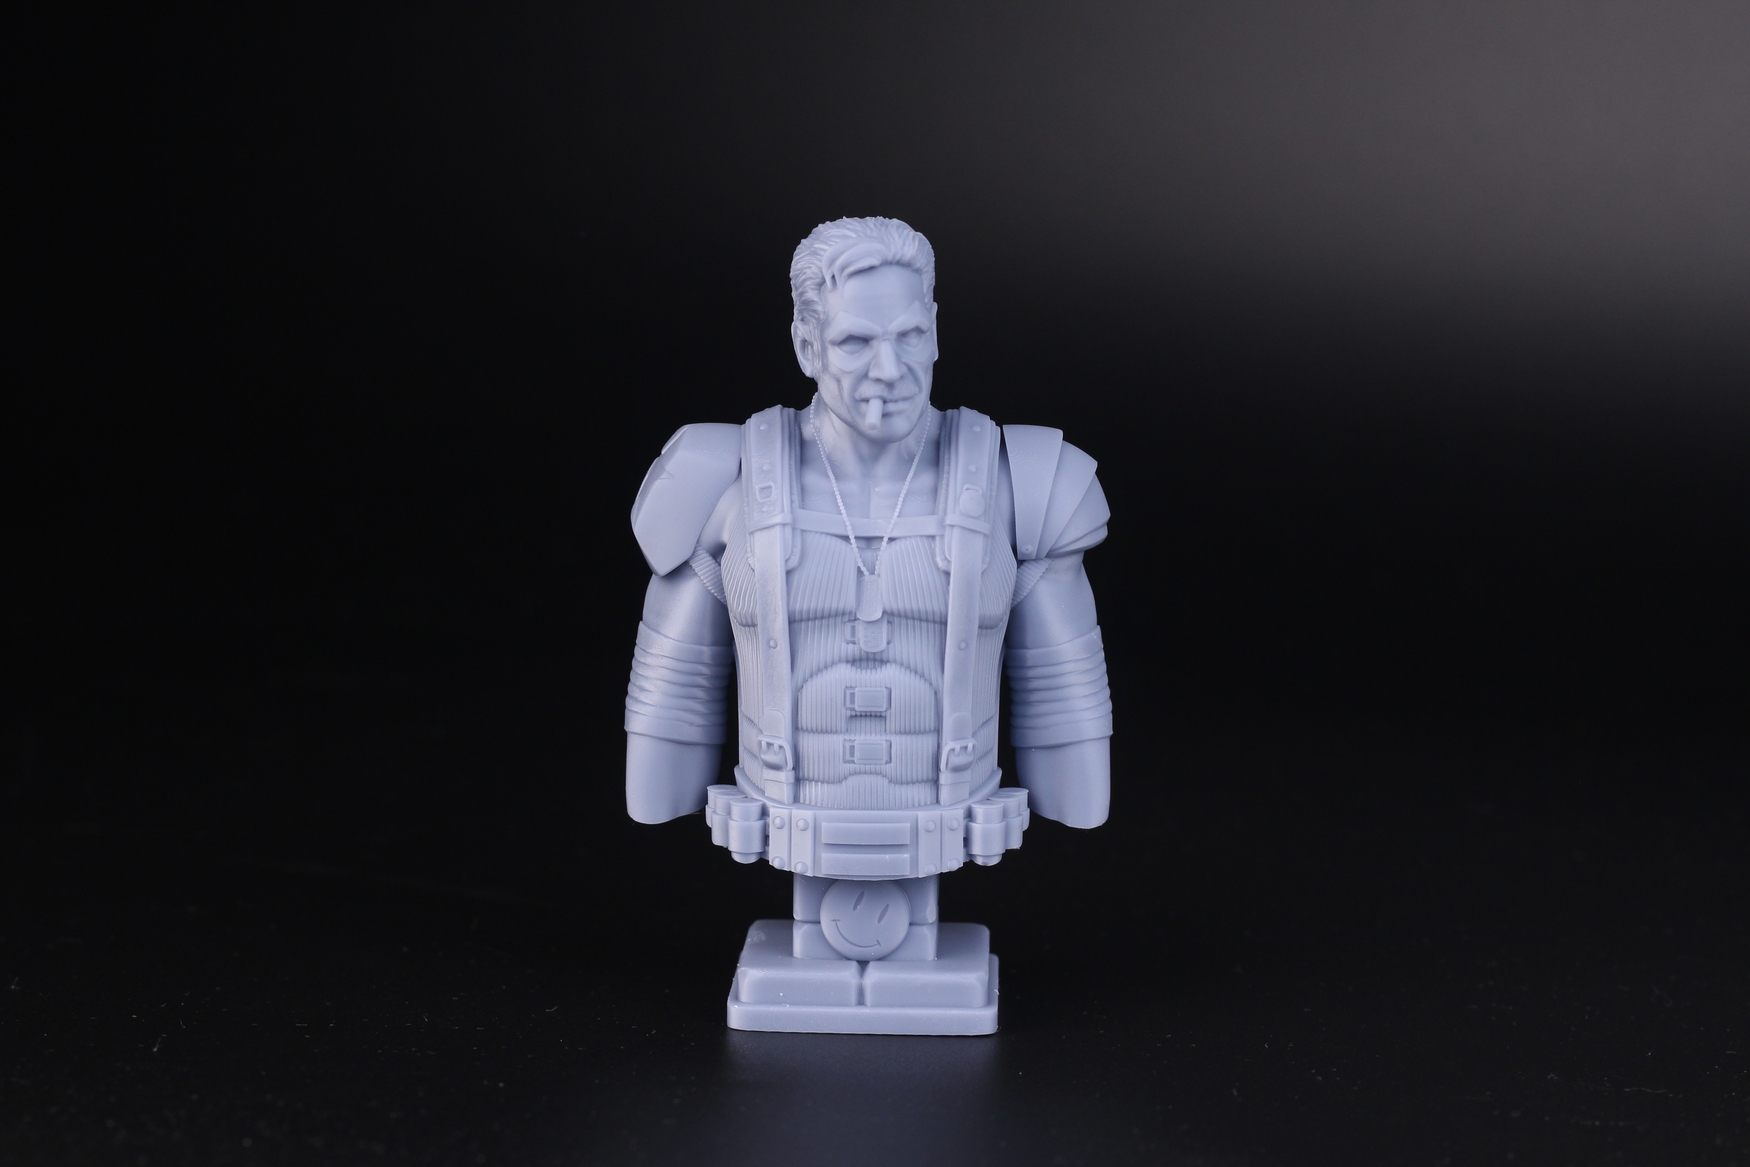 Anycubic M3 Review The Comedian bust form Fotis Mint1 1 | Anycubic Photon M3 Review: Bridging the gap